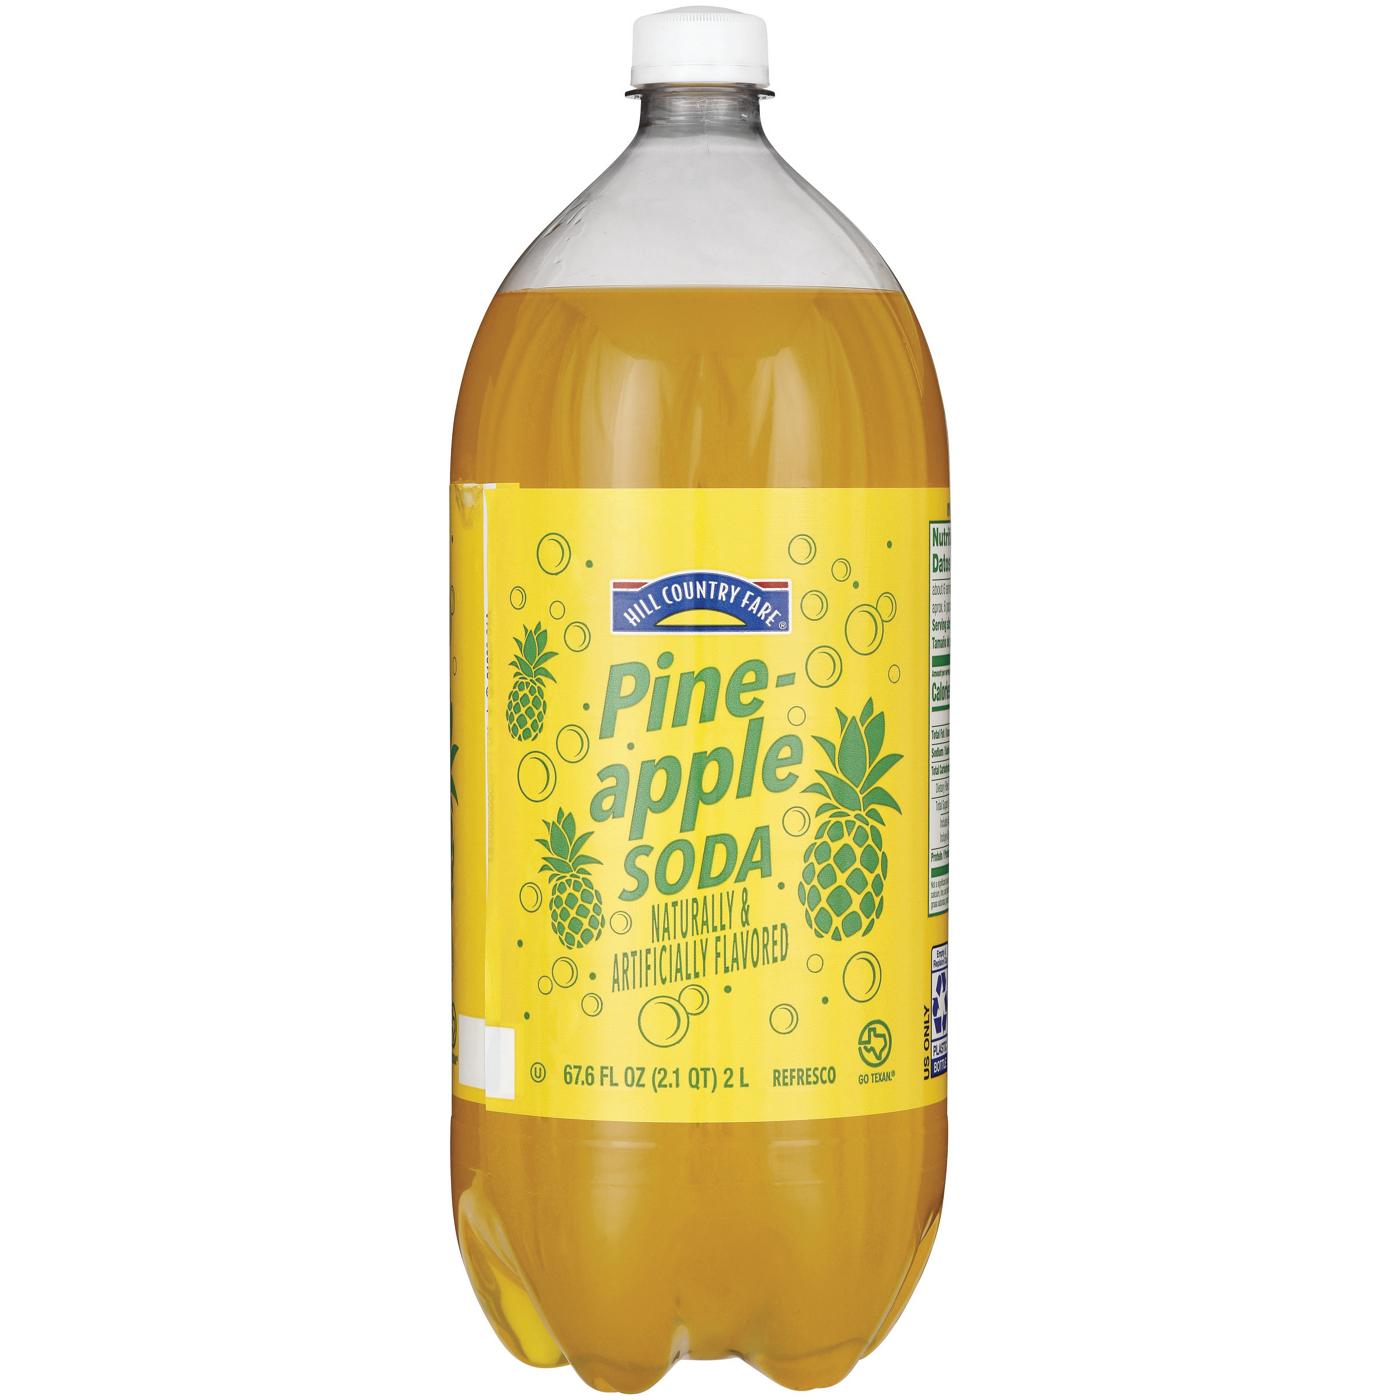 HCF Hill Country Fair Pineapple Soda; image 1 of 2